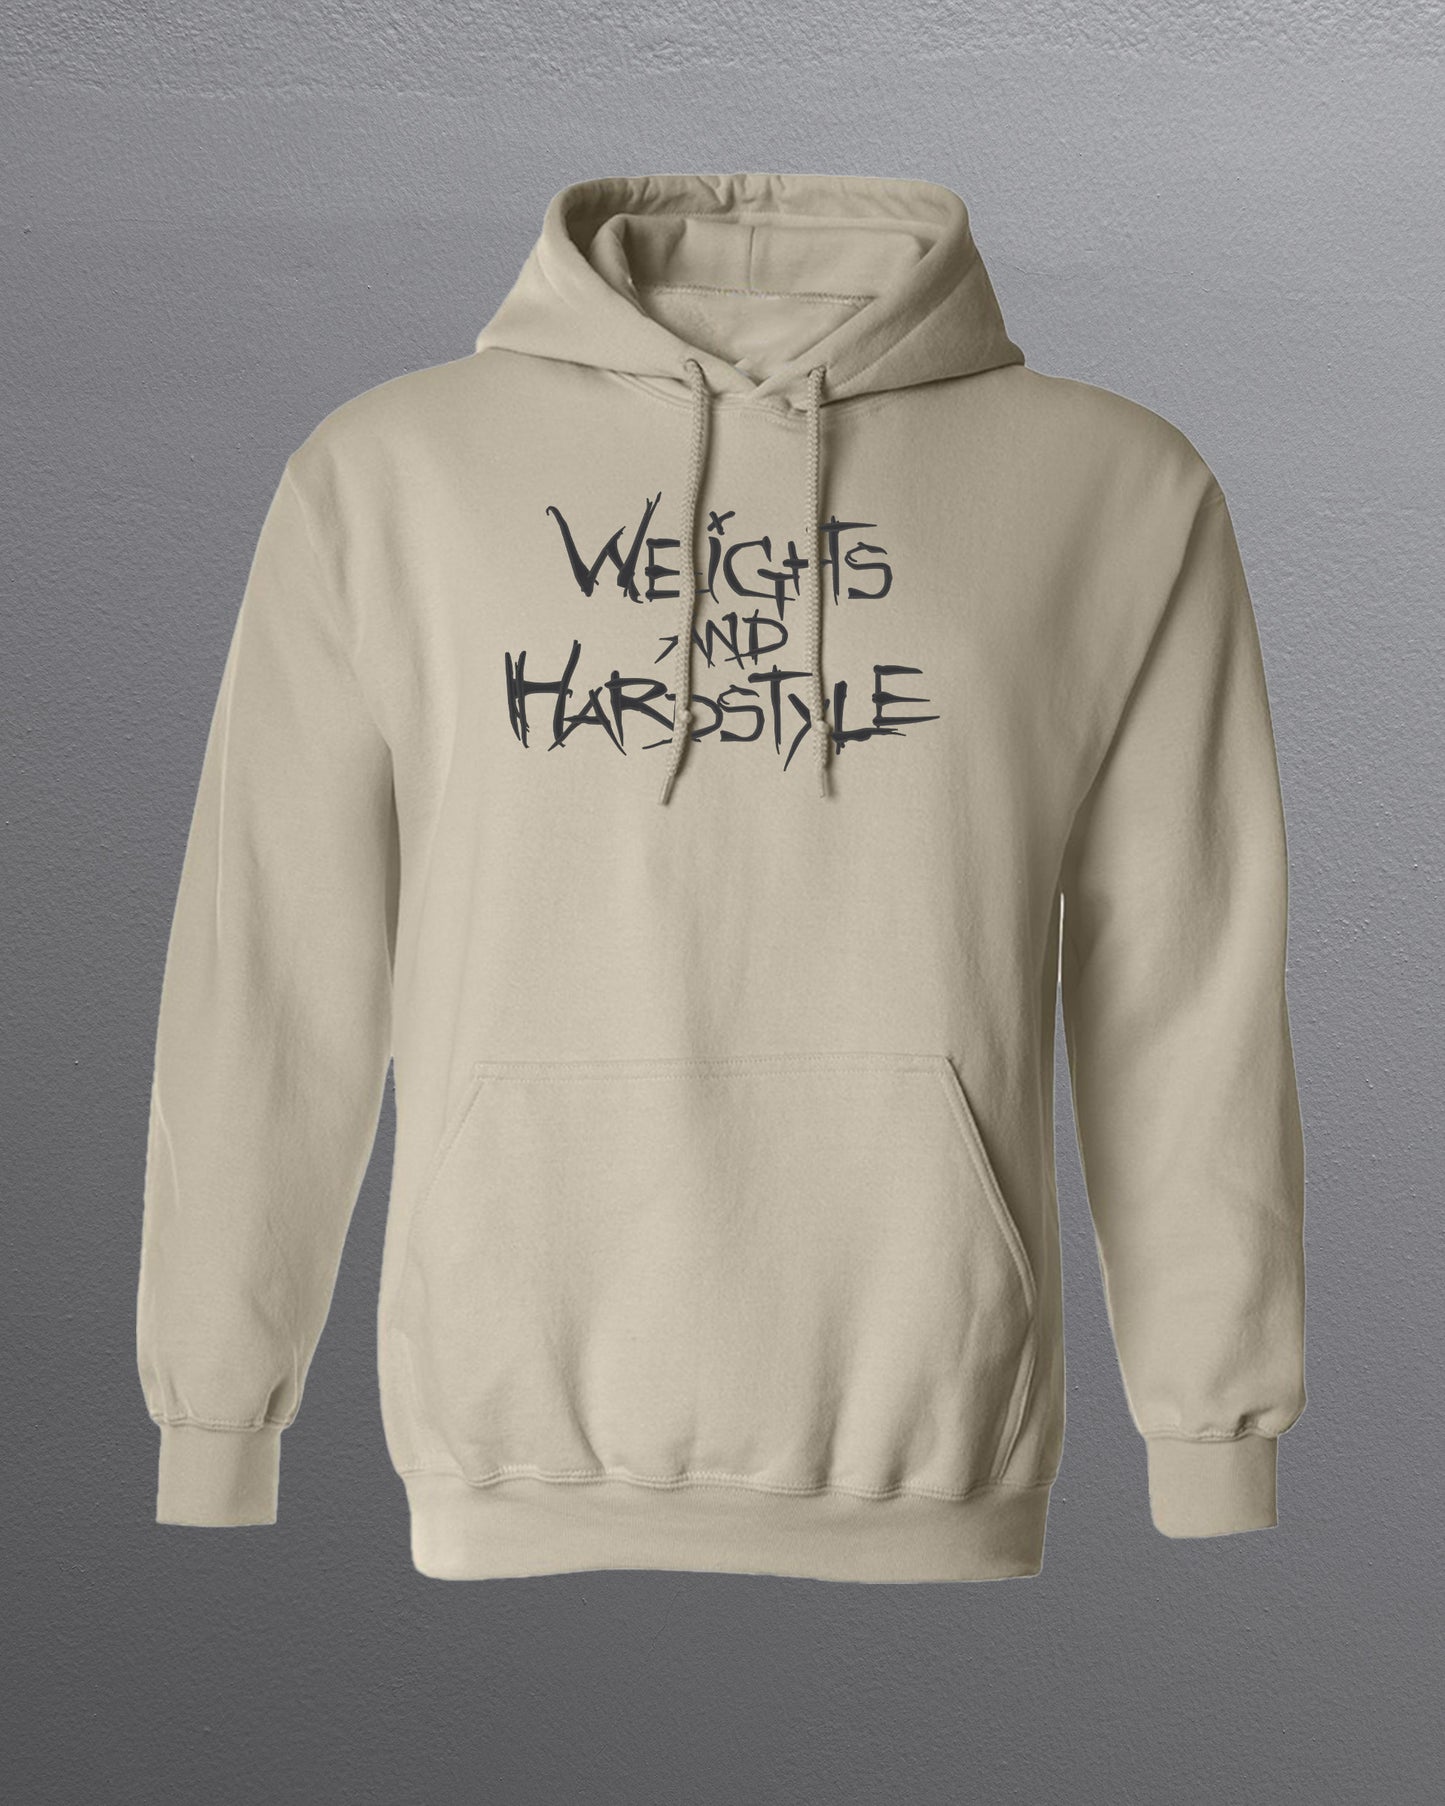 Weights and Hardstyle Embroidered Hoodie